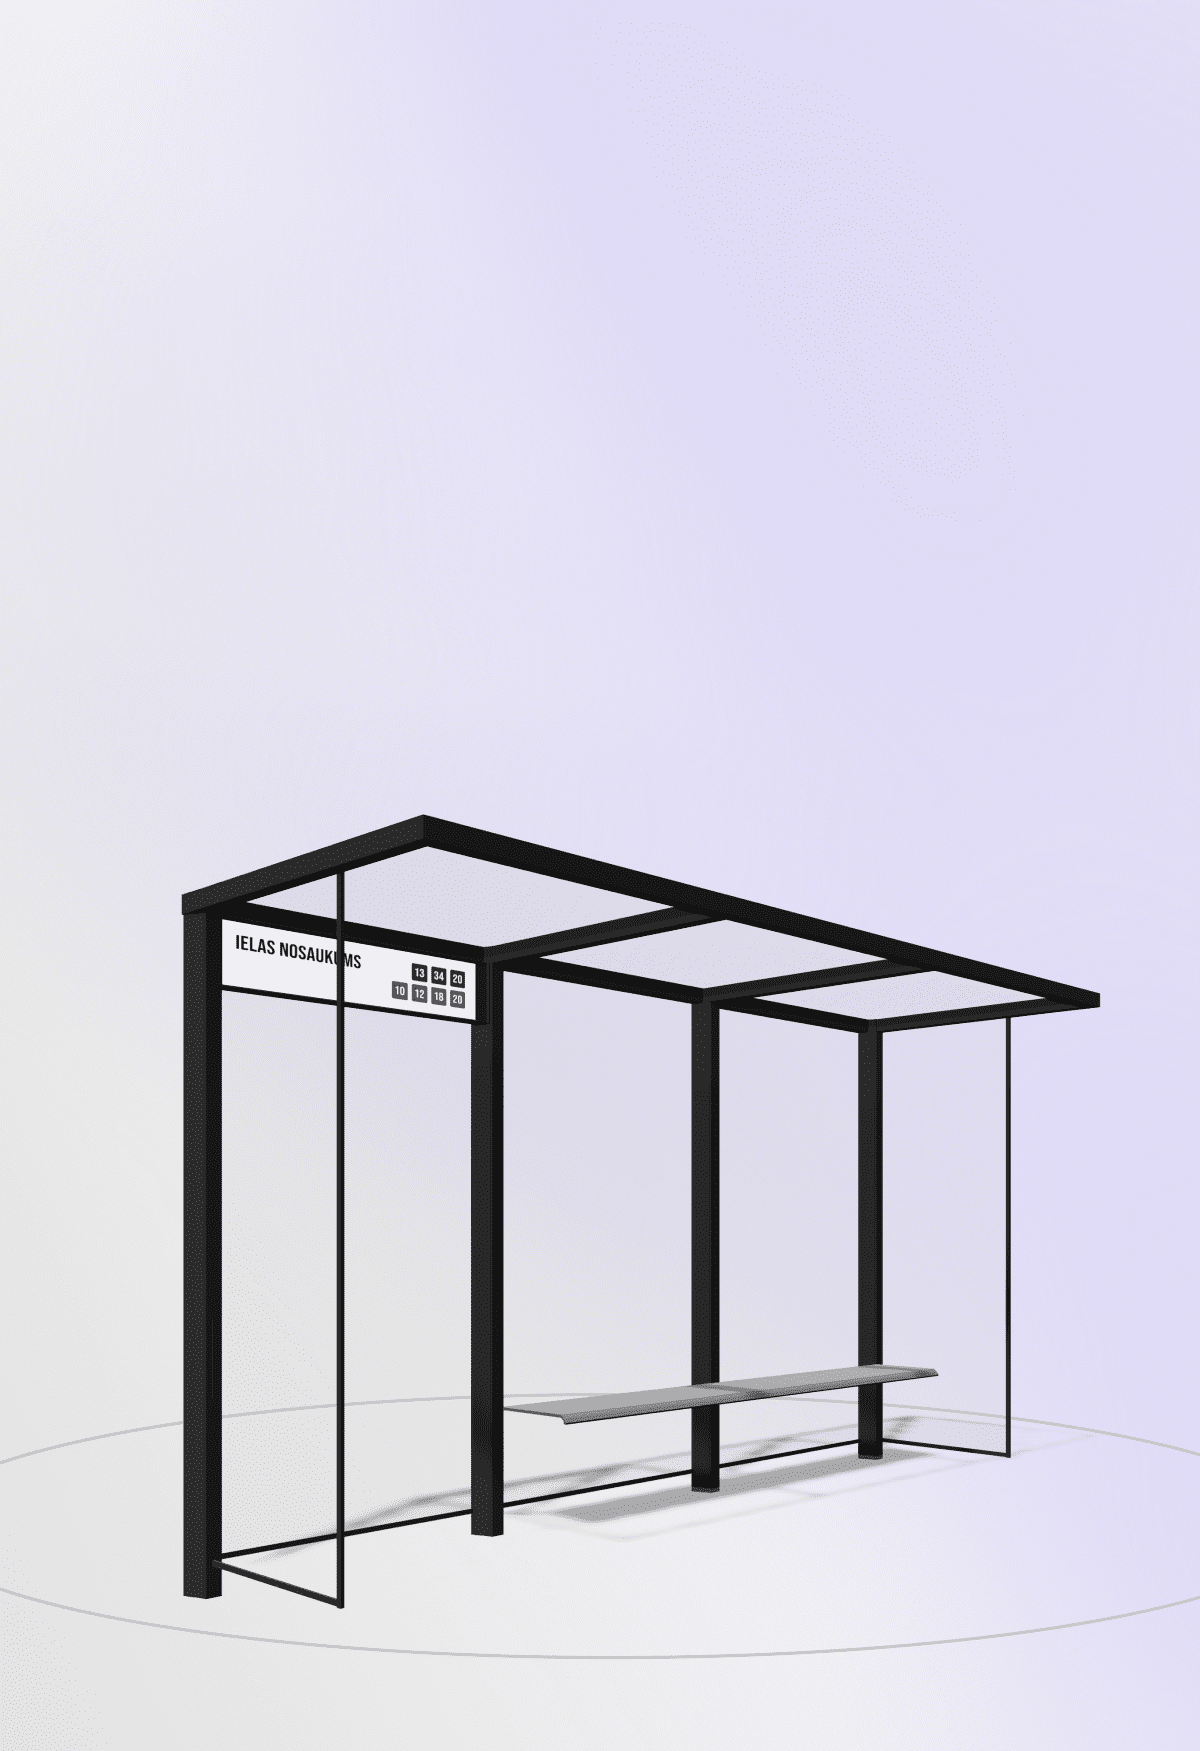 Bus Stop Shelter OSLO by PALAMI Group